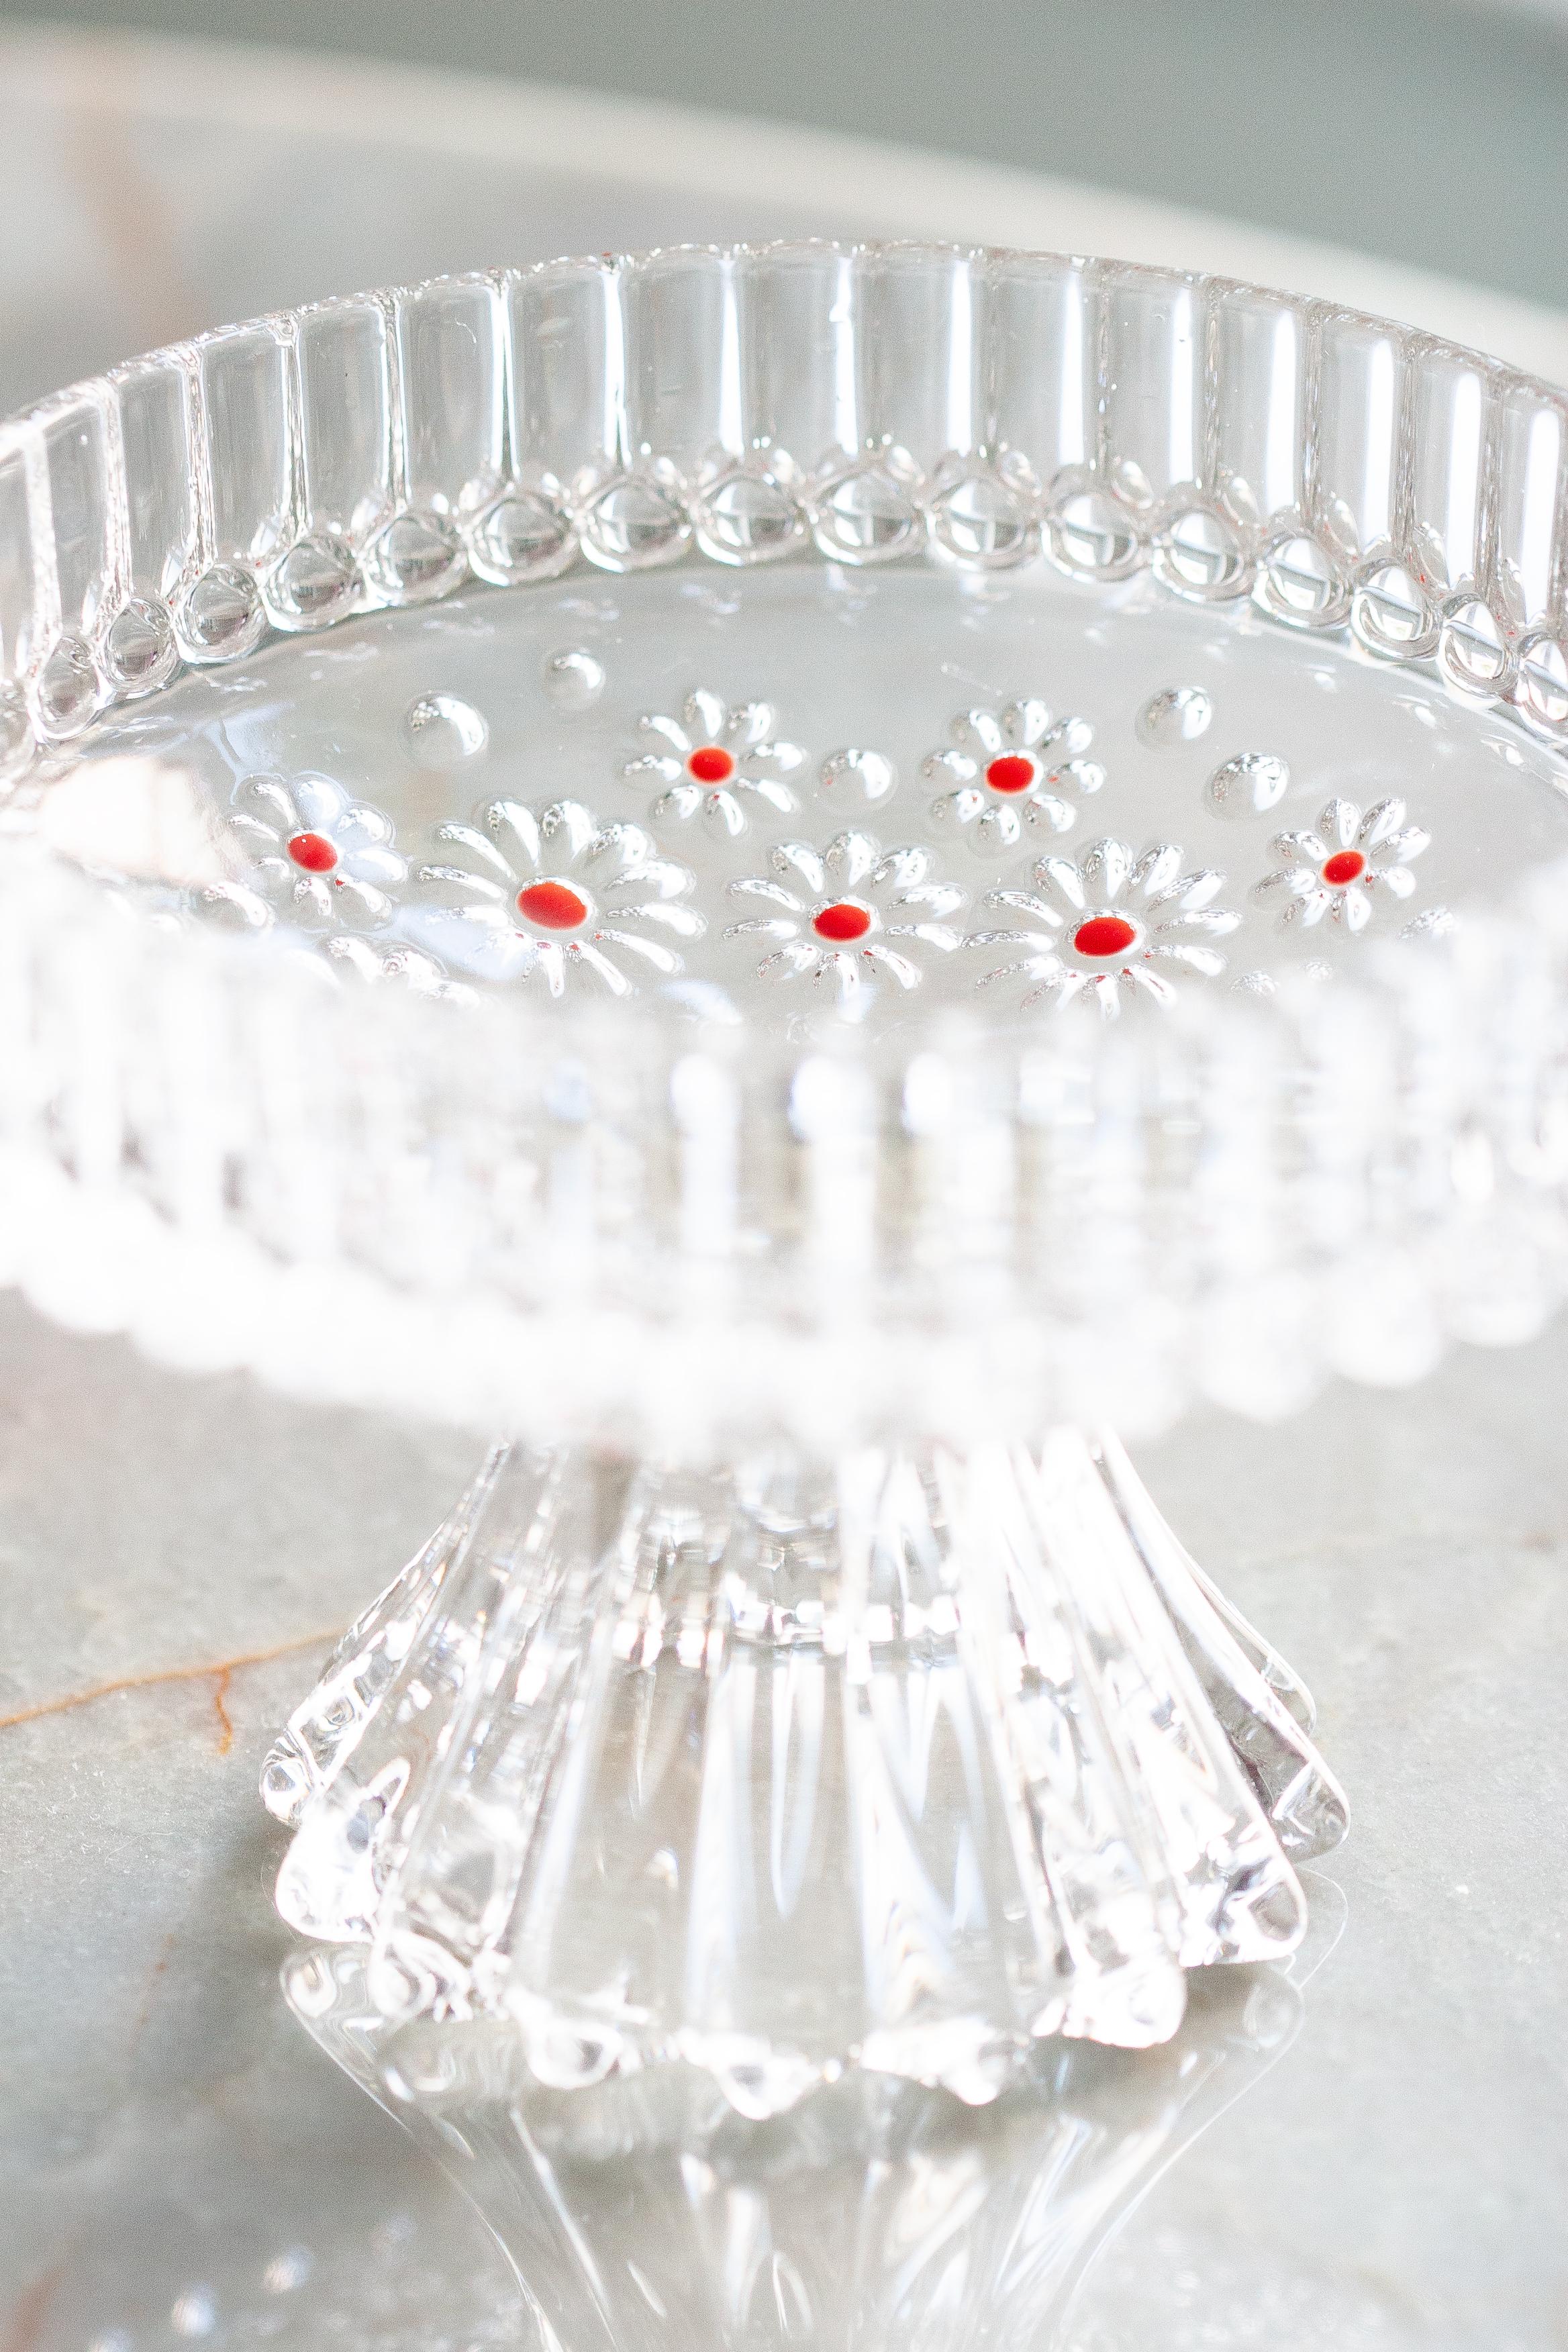 Ceramic Vintage Transparent Decorative Crystal Glass Plate, Italy, 1960s For Sale